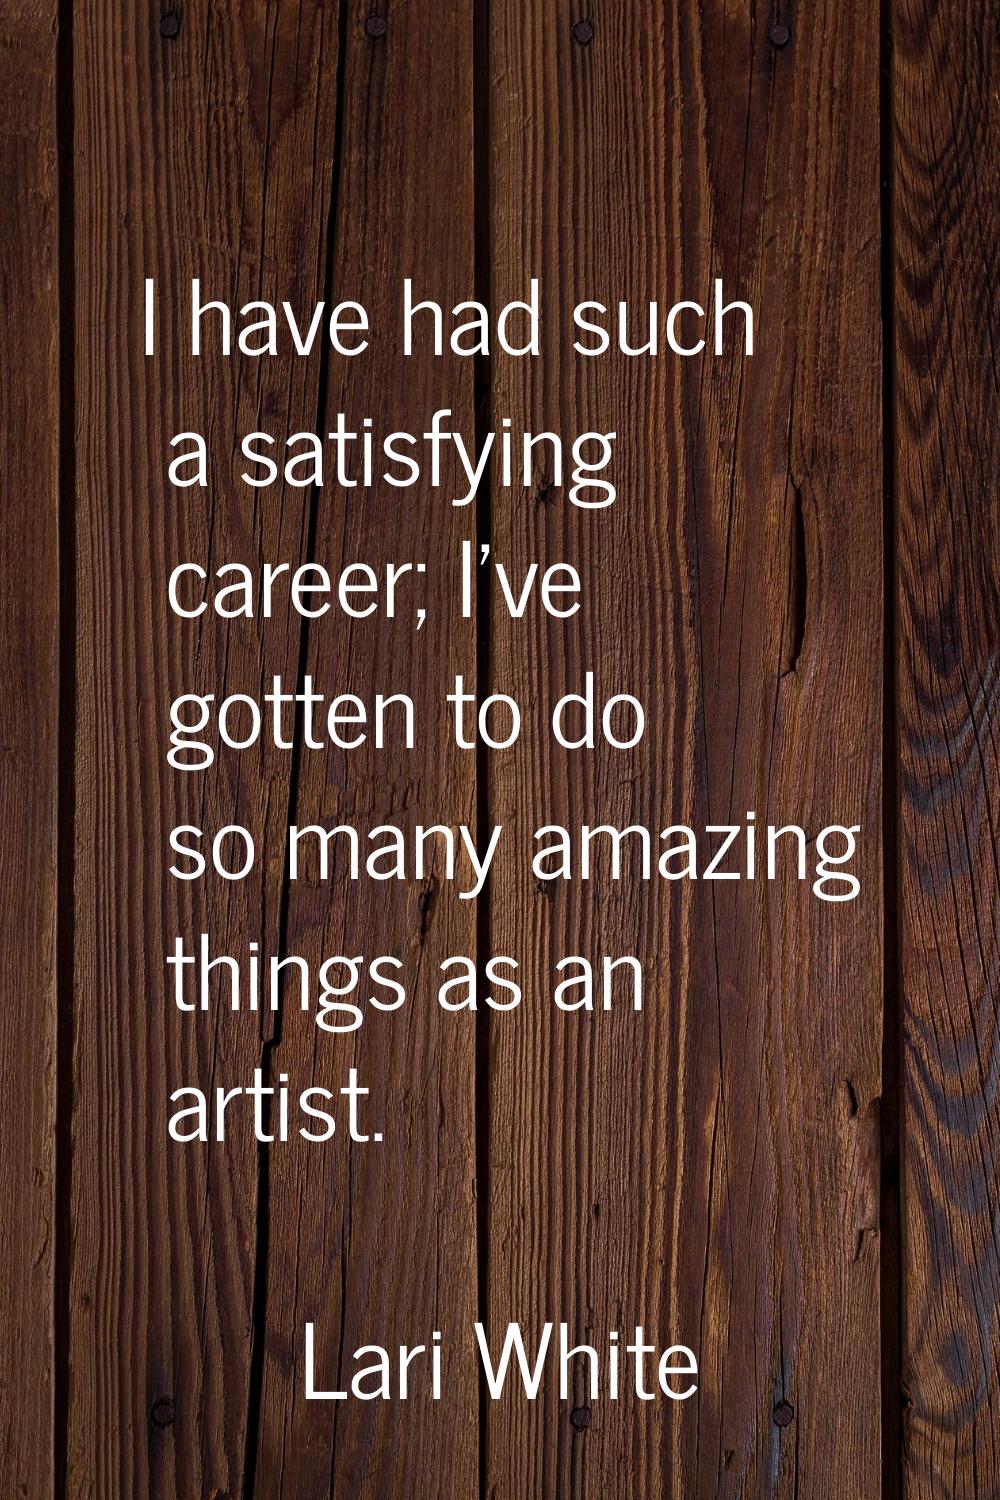 I have had such a satisfying career; I've gotten to do so many amazing things as an artist.